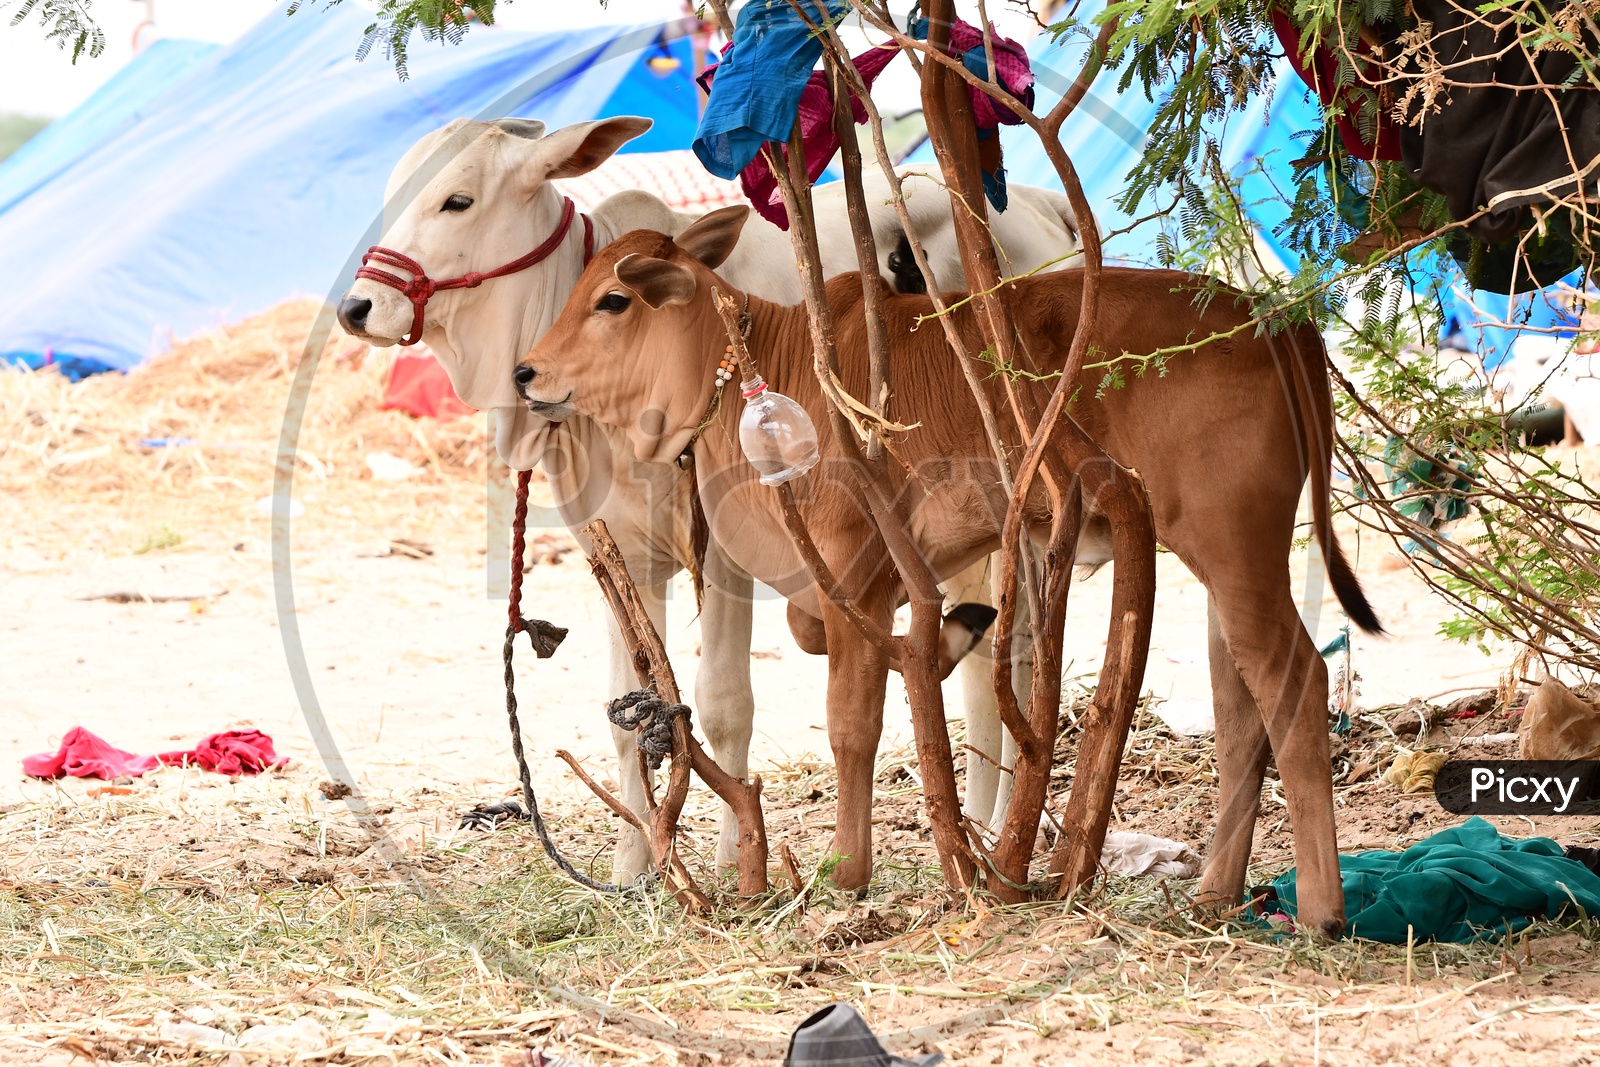 Indian Cows in a rural cattle